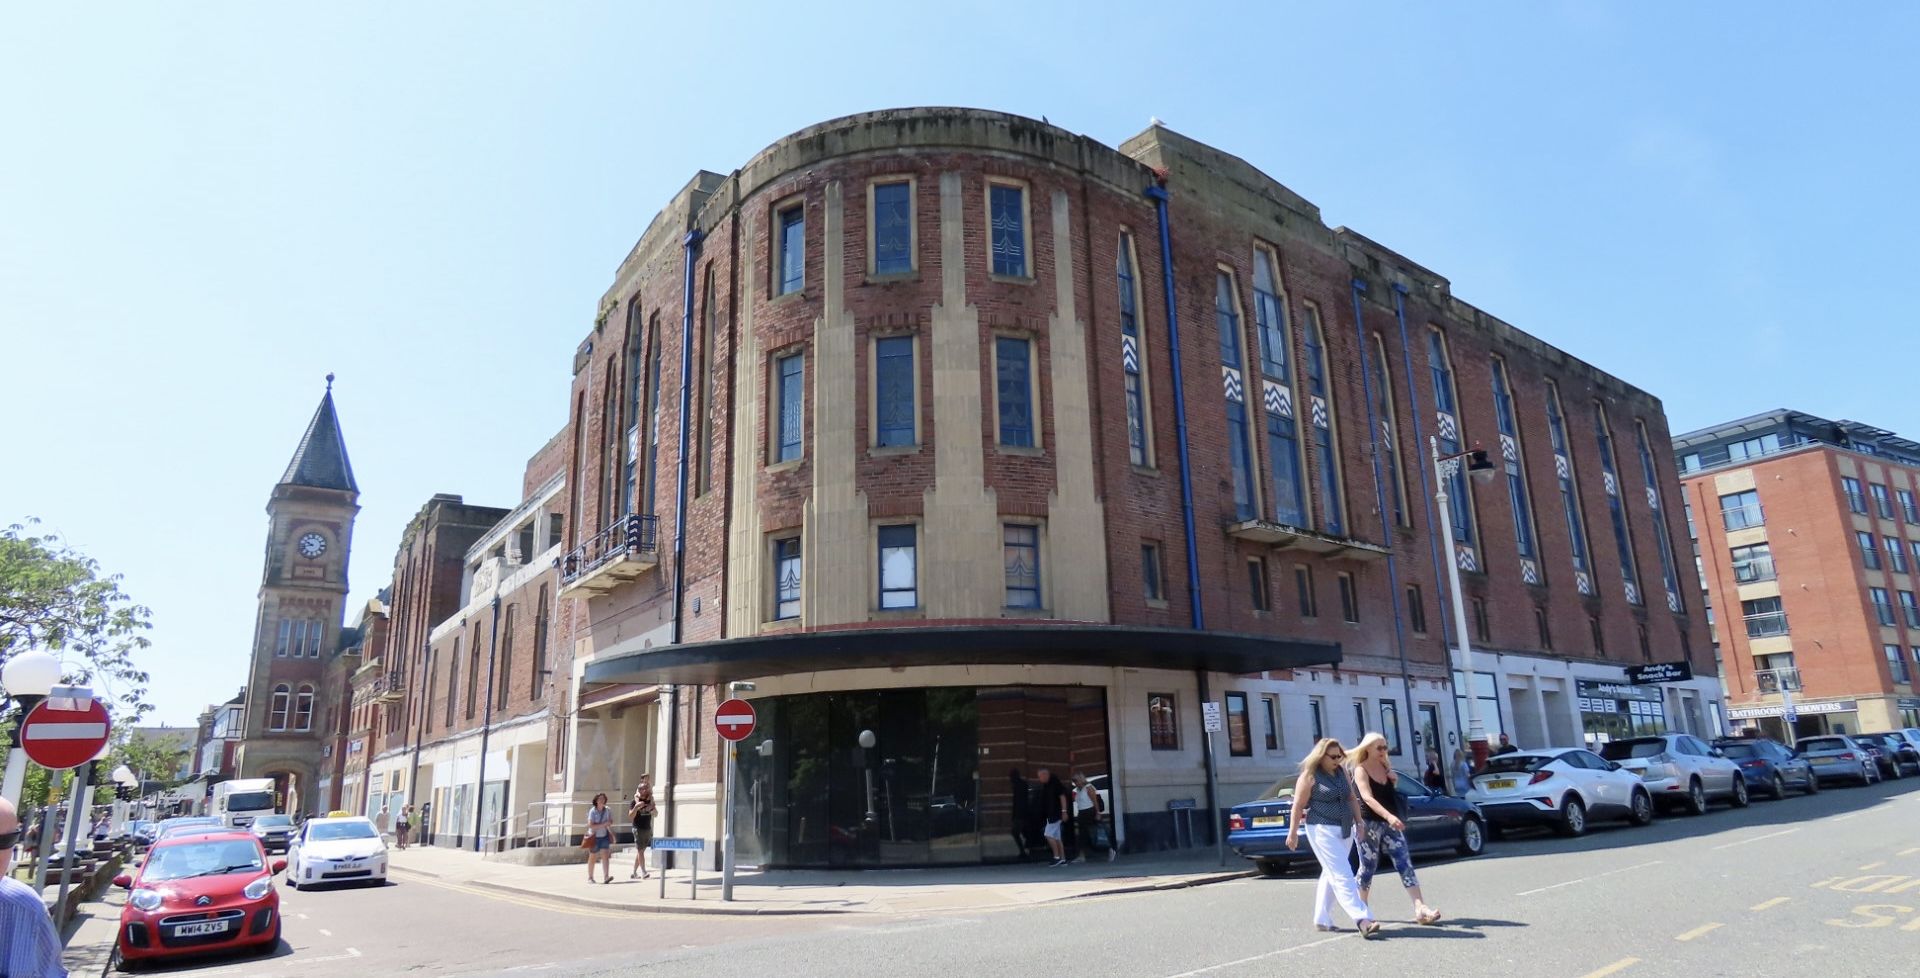 The former Garrick Theatre in Southport. Photo by Andrew Brown Stand Up For Southport